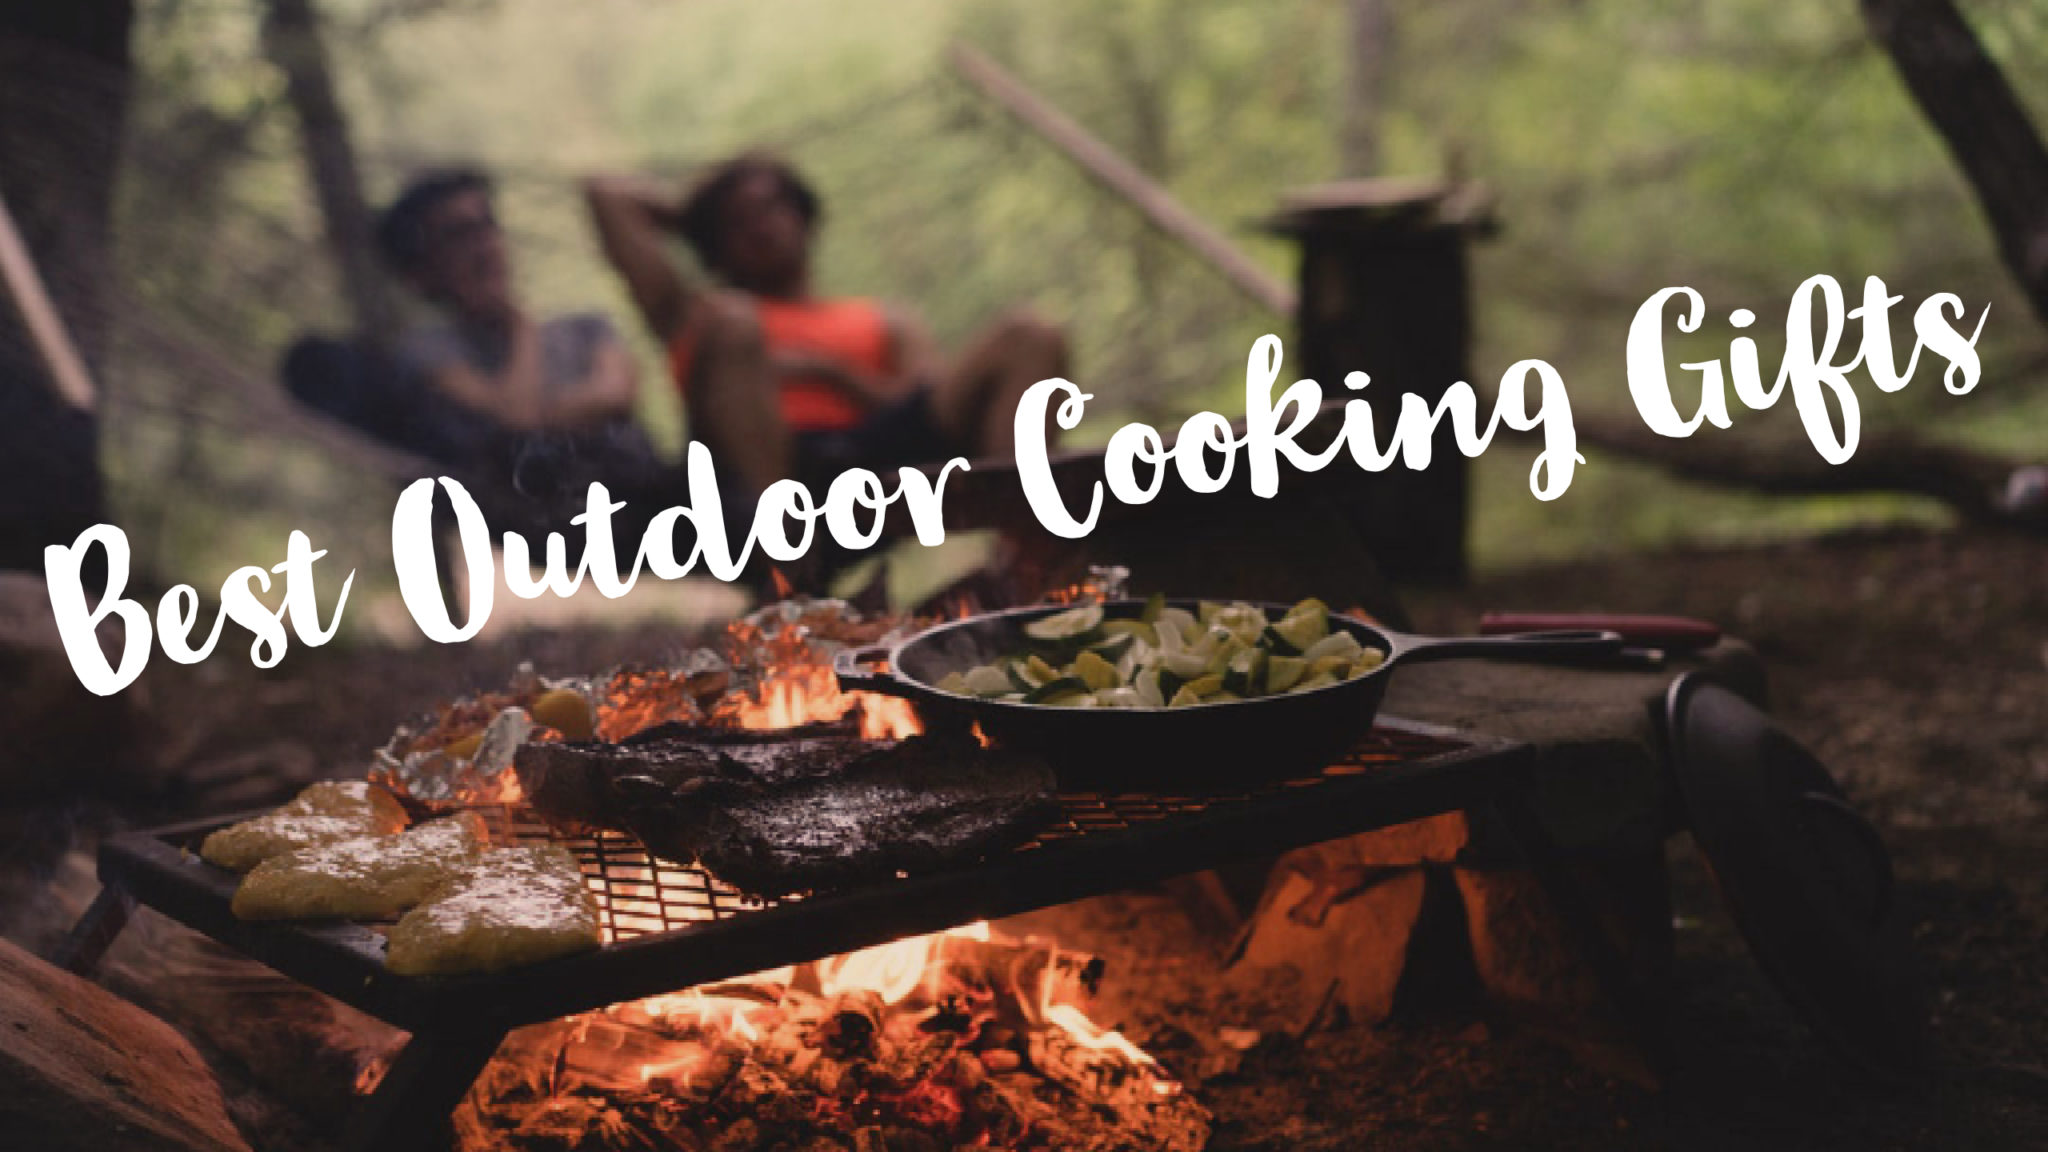 Christmas Gift Idea #4 for Outdoorsy People! Kitchen Gear for Campfire  Cooking! – It's More Fun Outdoors!